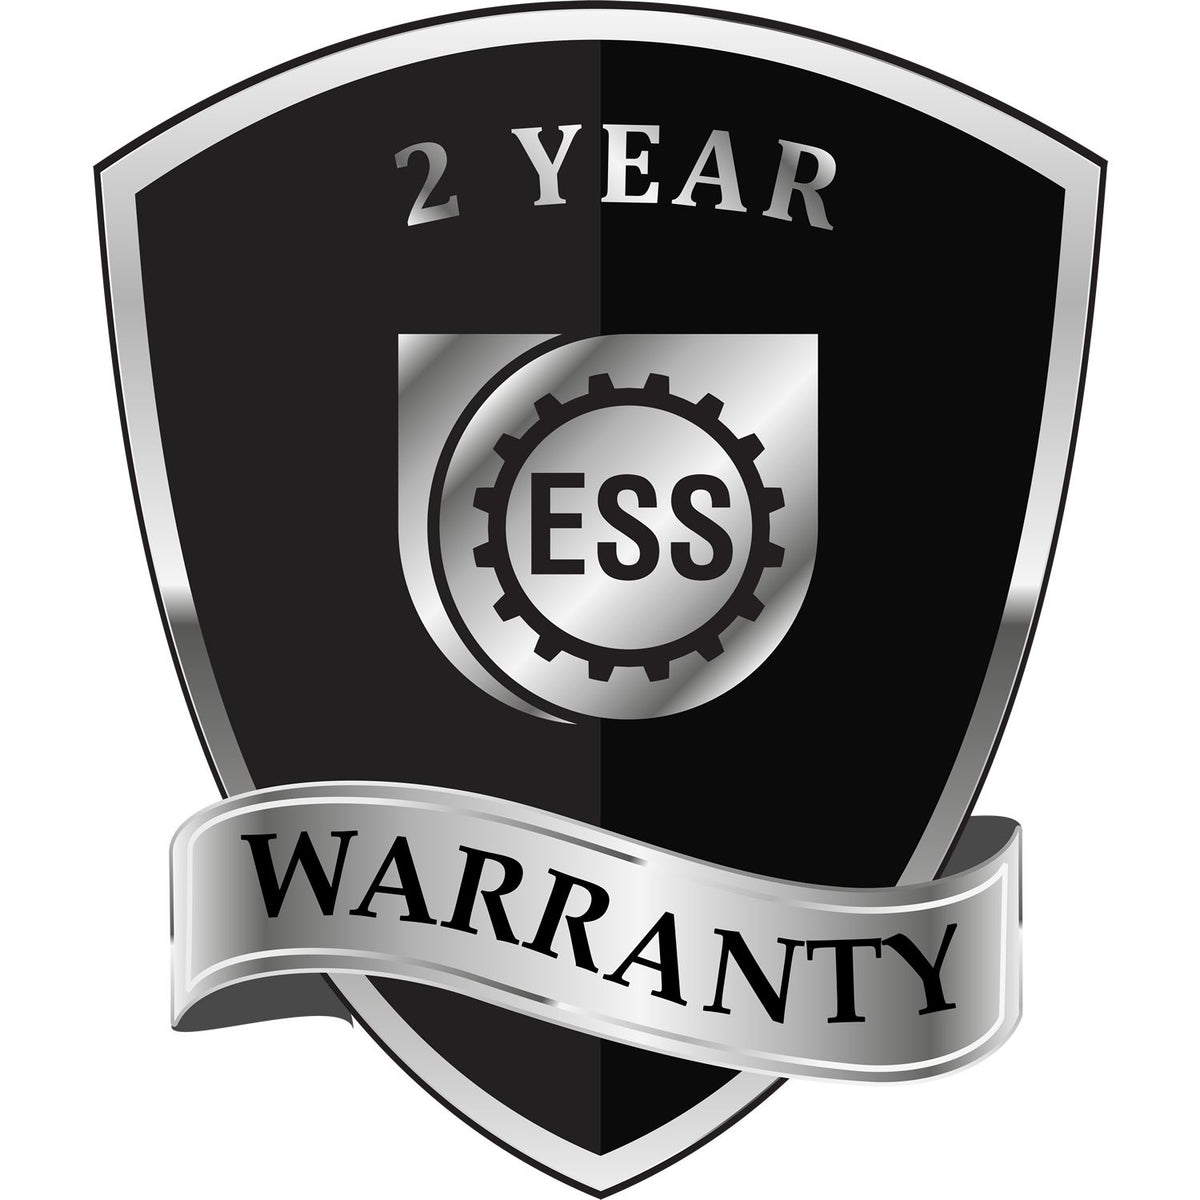 A black and silver badge or emblem showing warranty information for the Long Reach Hawaii Geology Seal